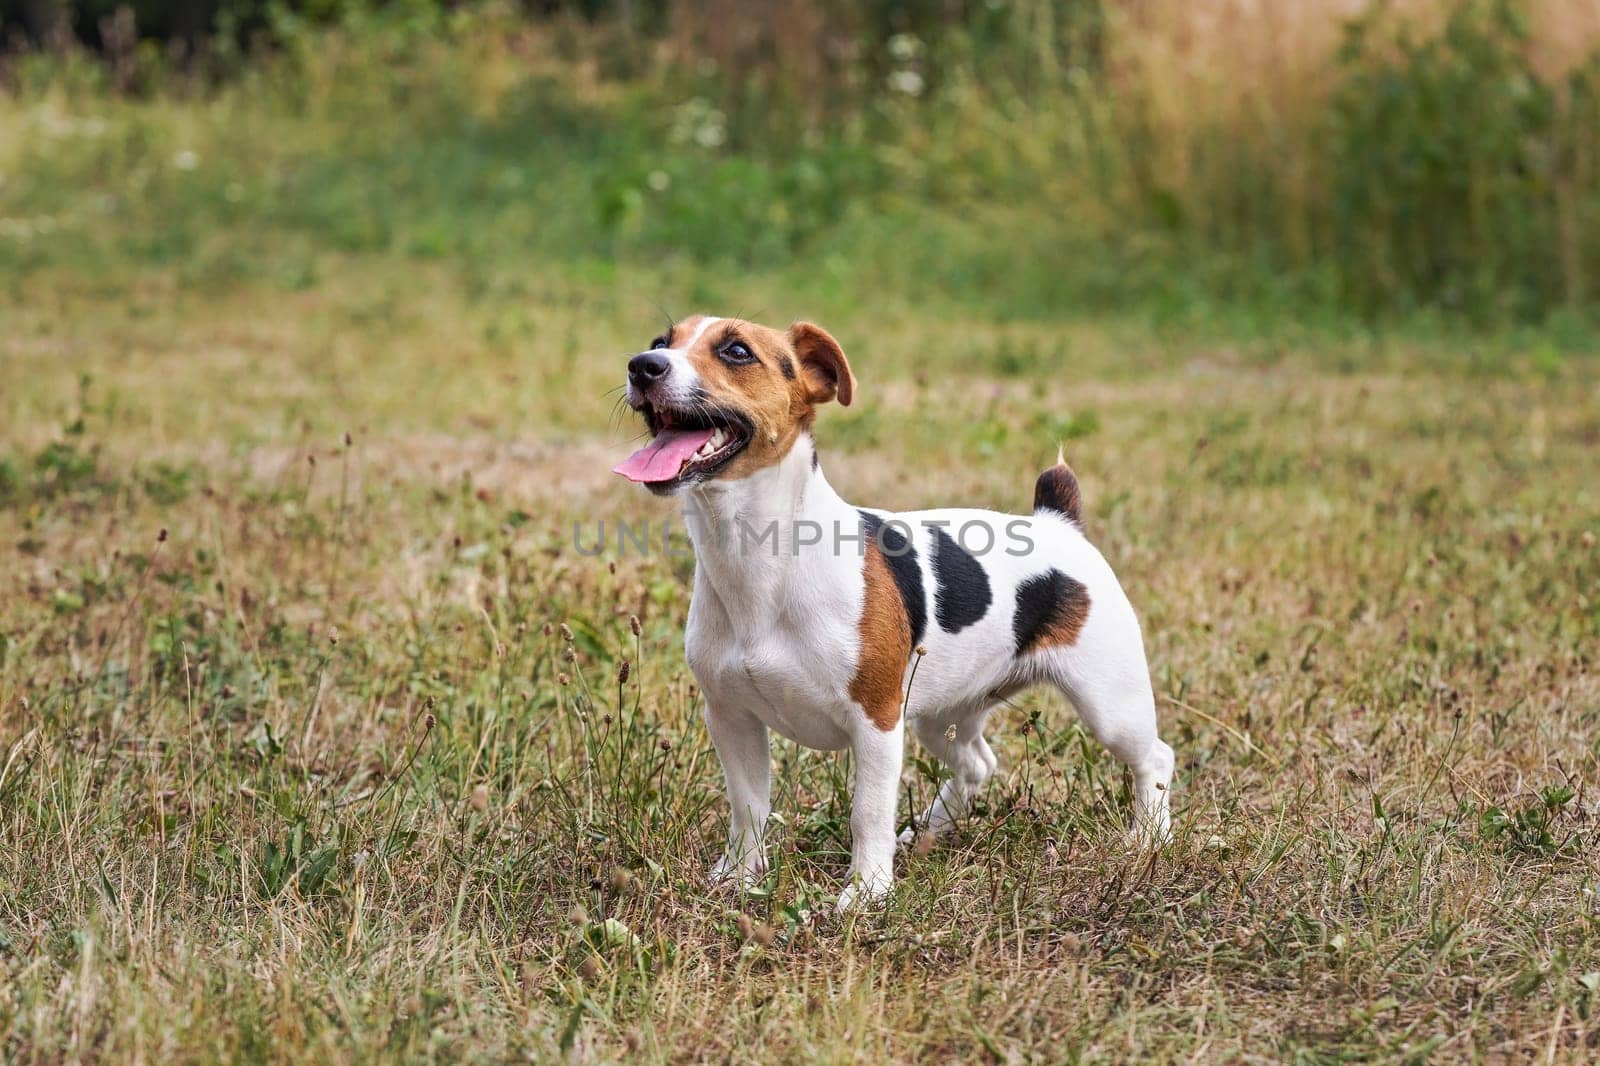 Small Jack Russell dog standing on meadow, her tongue out, looking up, waiting for toy to be thrown for her by Ivanko